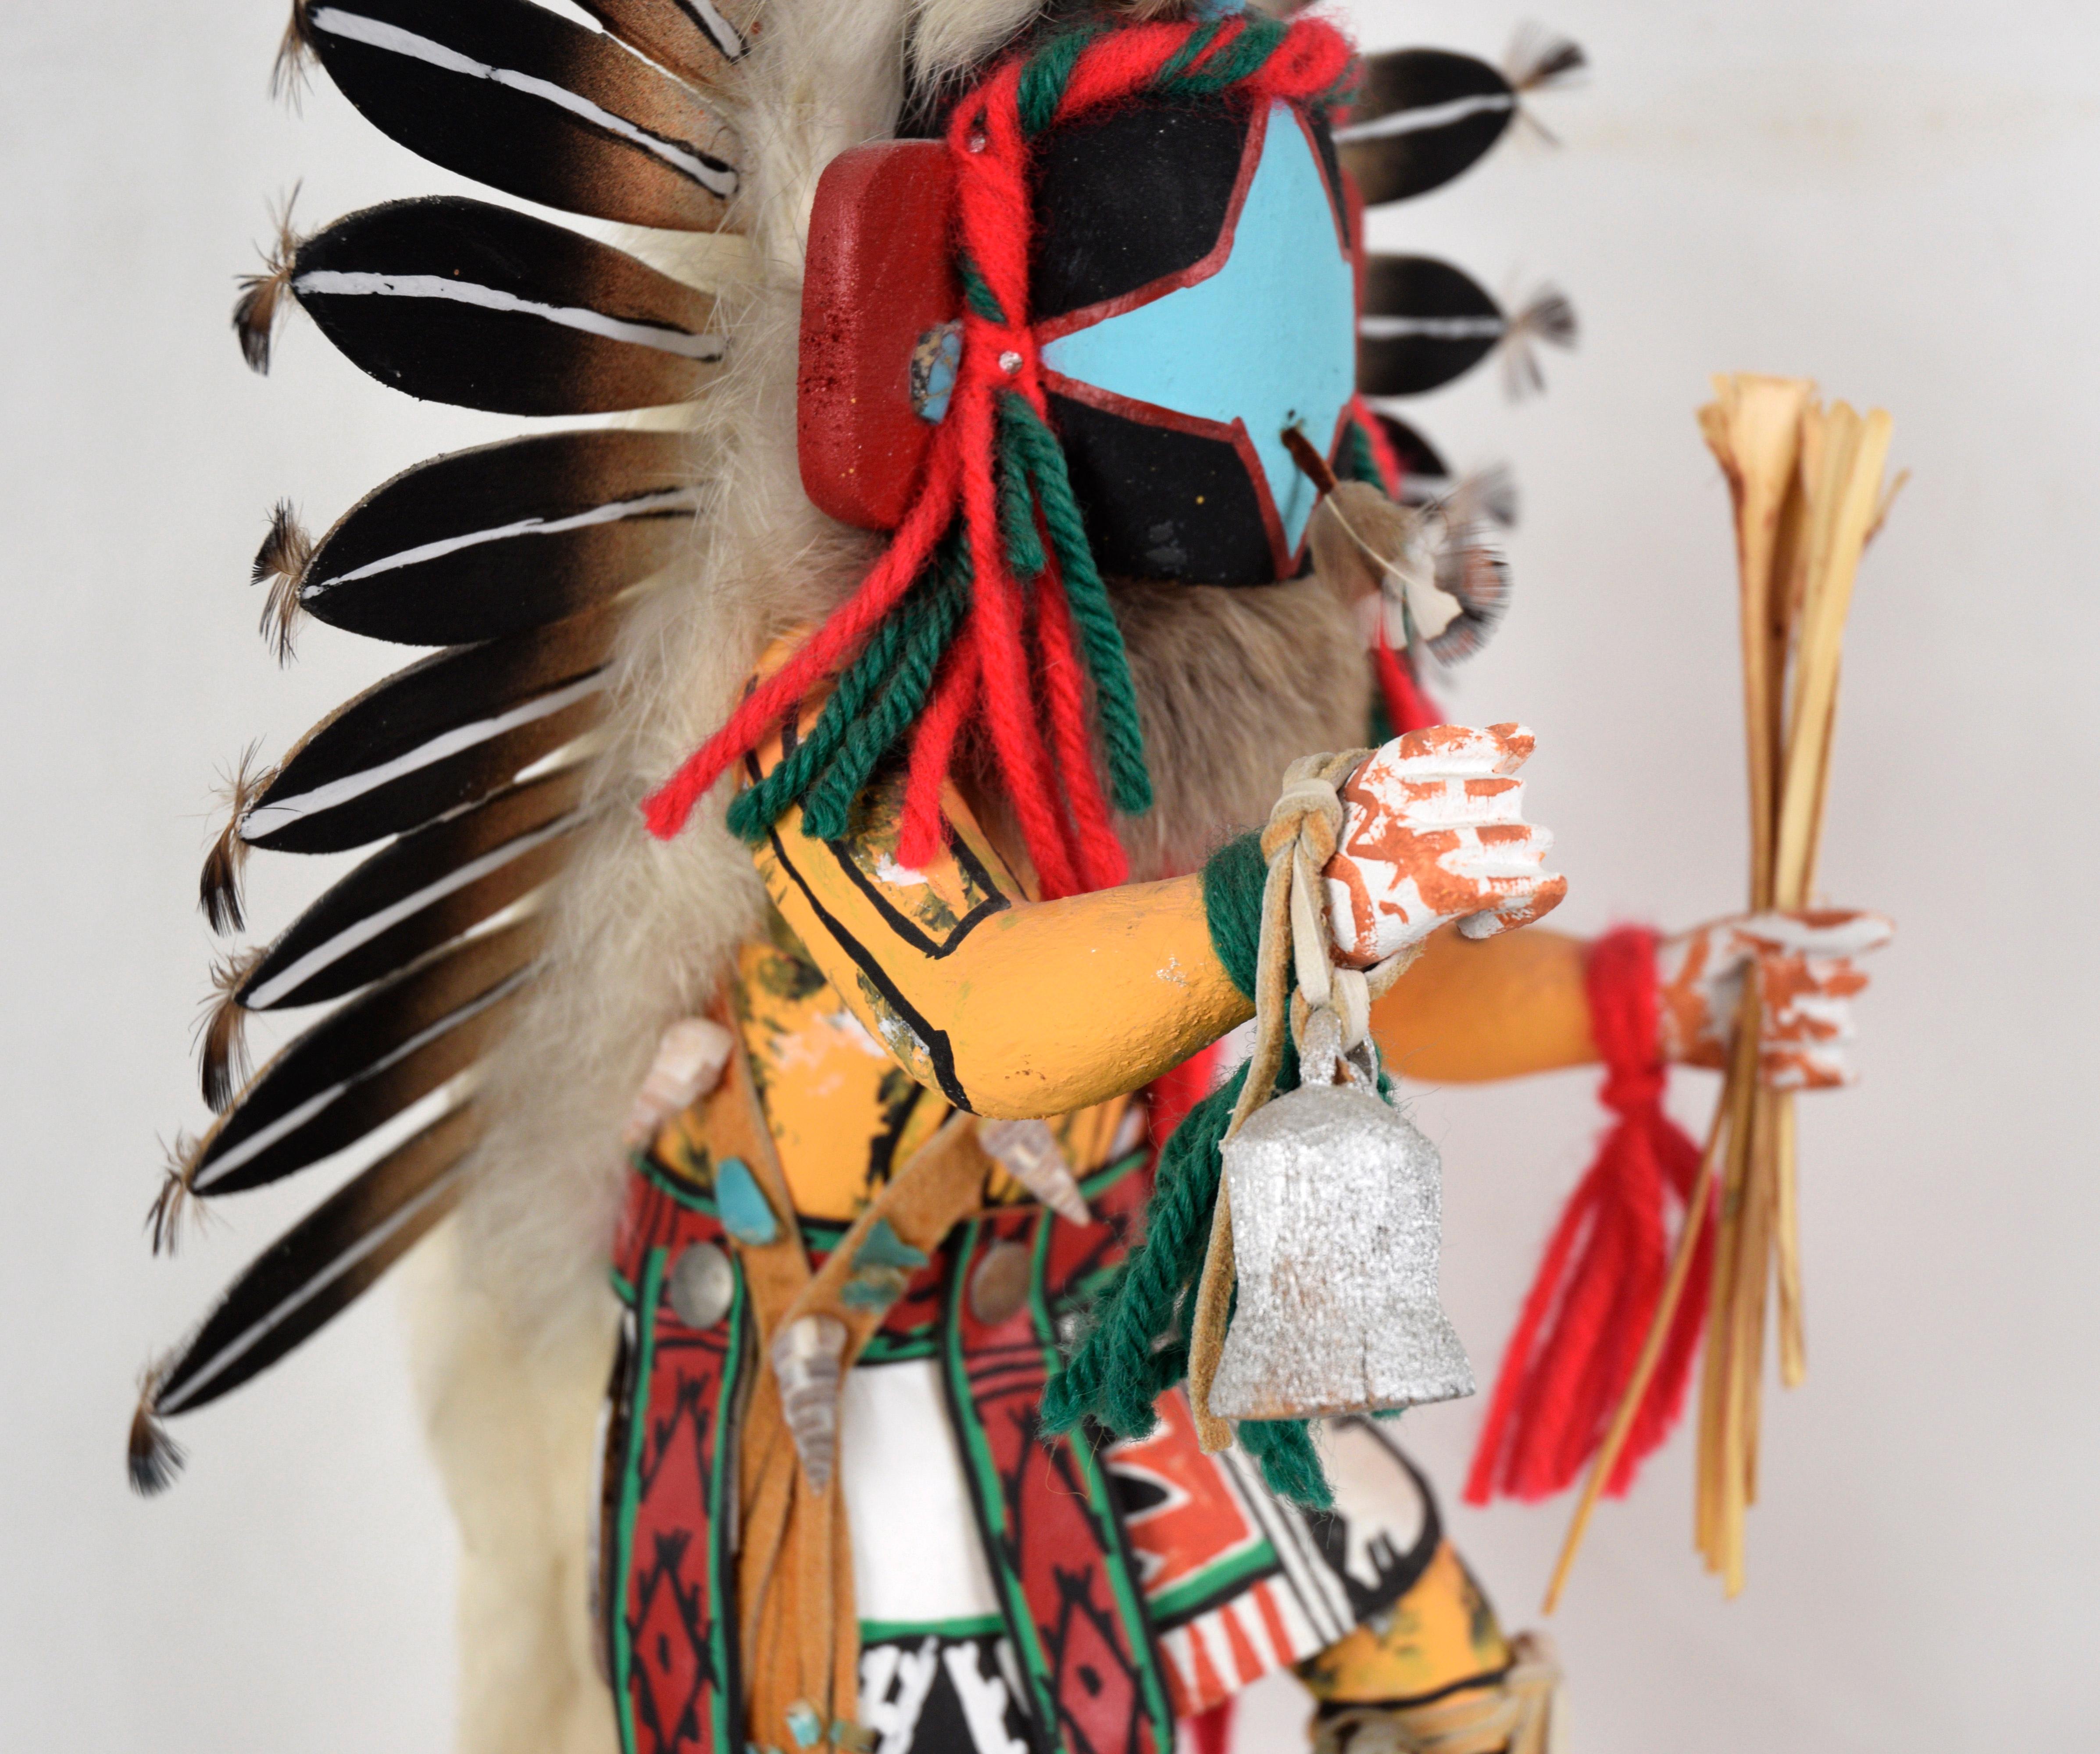 American Chasing Star Performing a Dance - Kachina Doll by Rena Jean (Whitehorse) For Sale